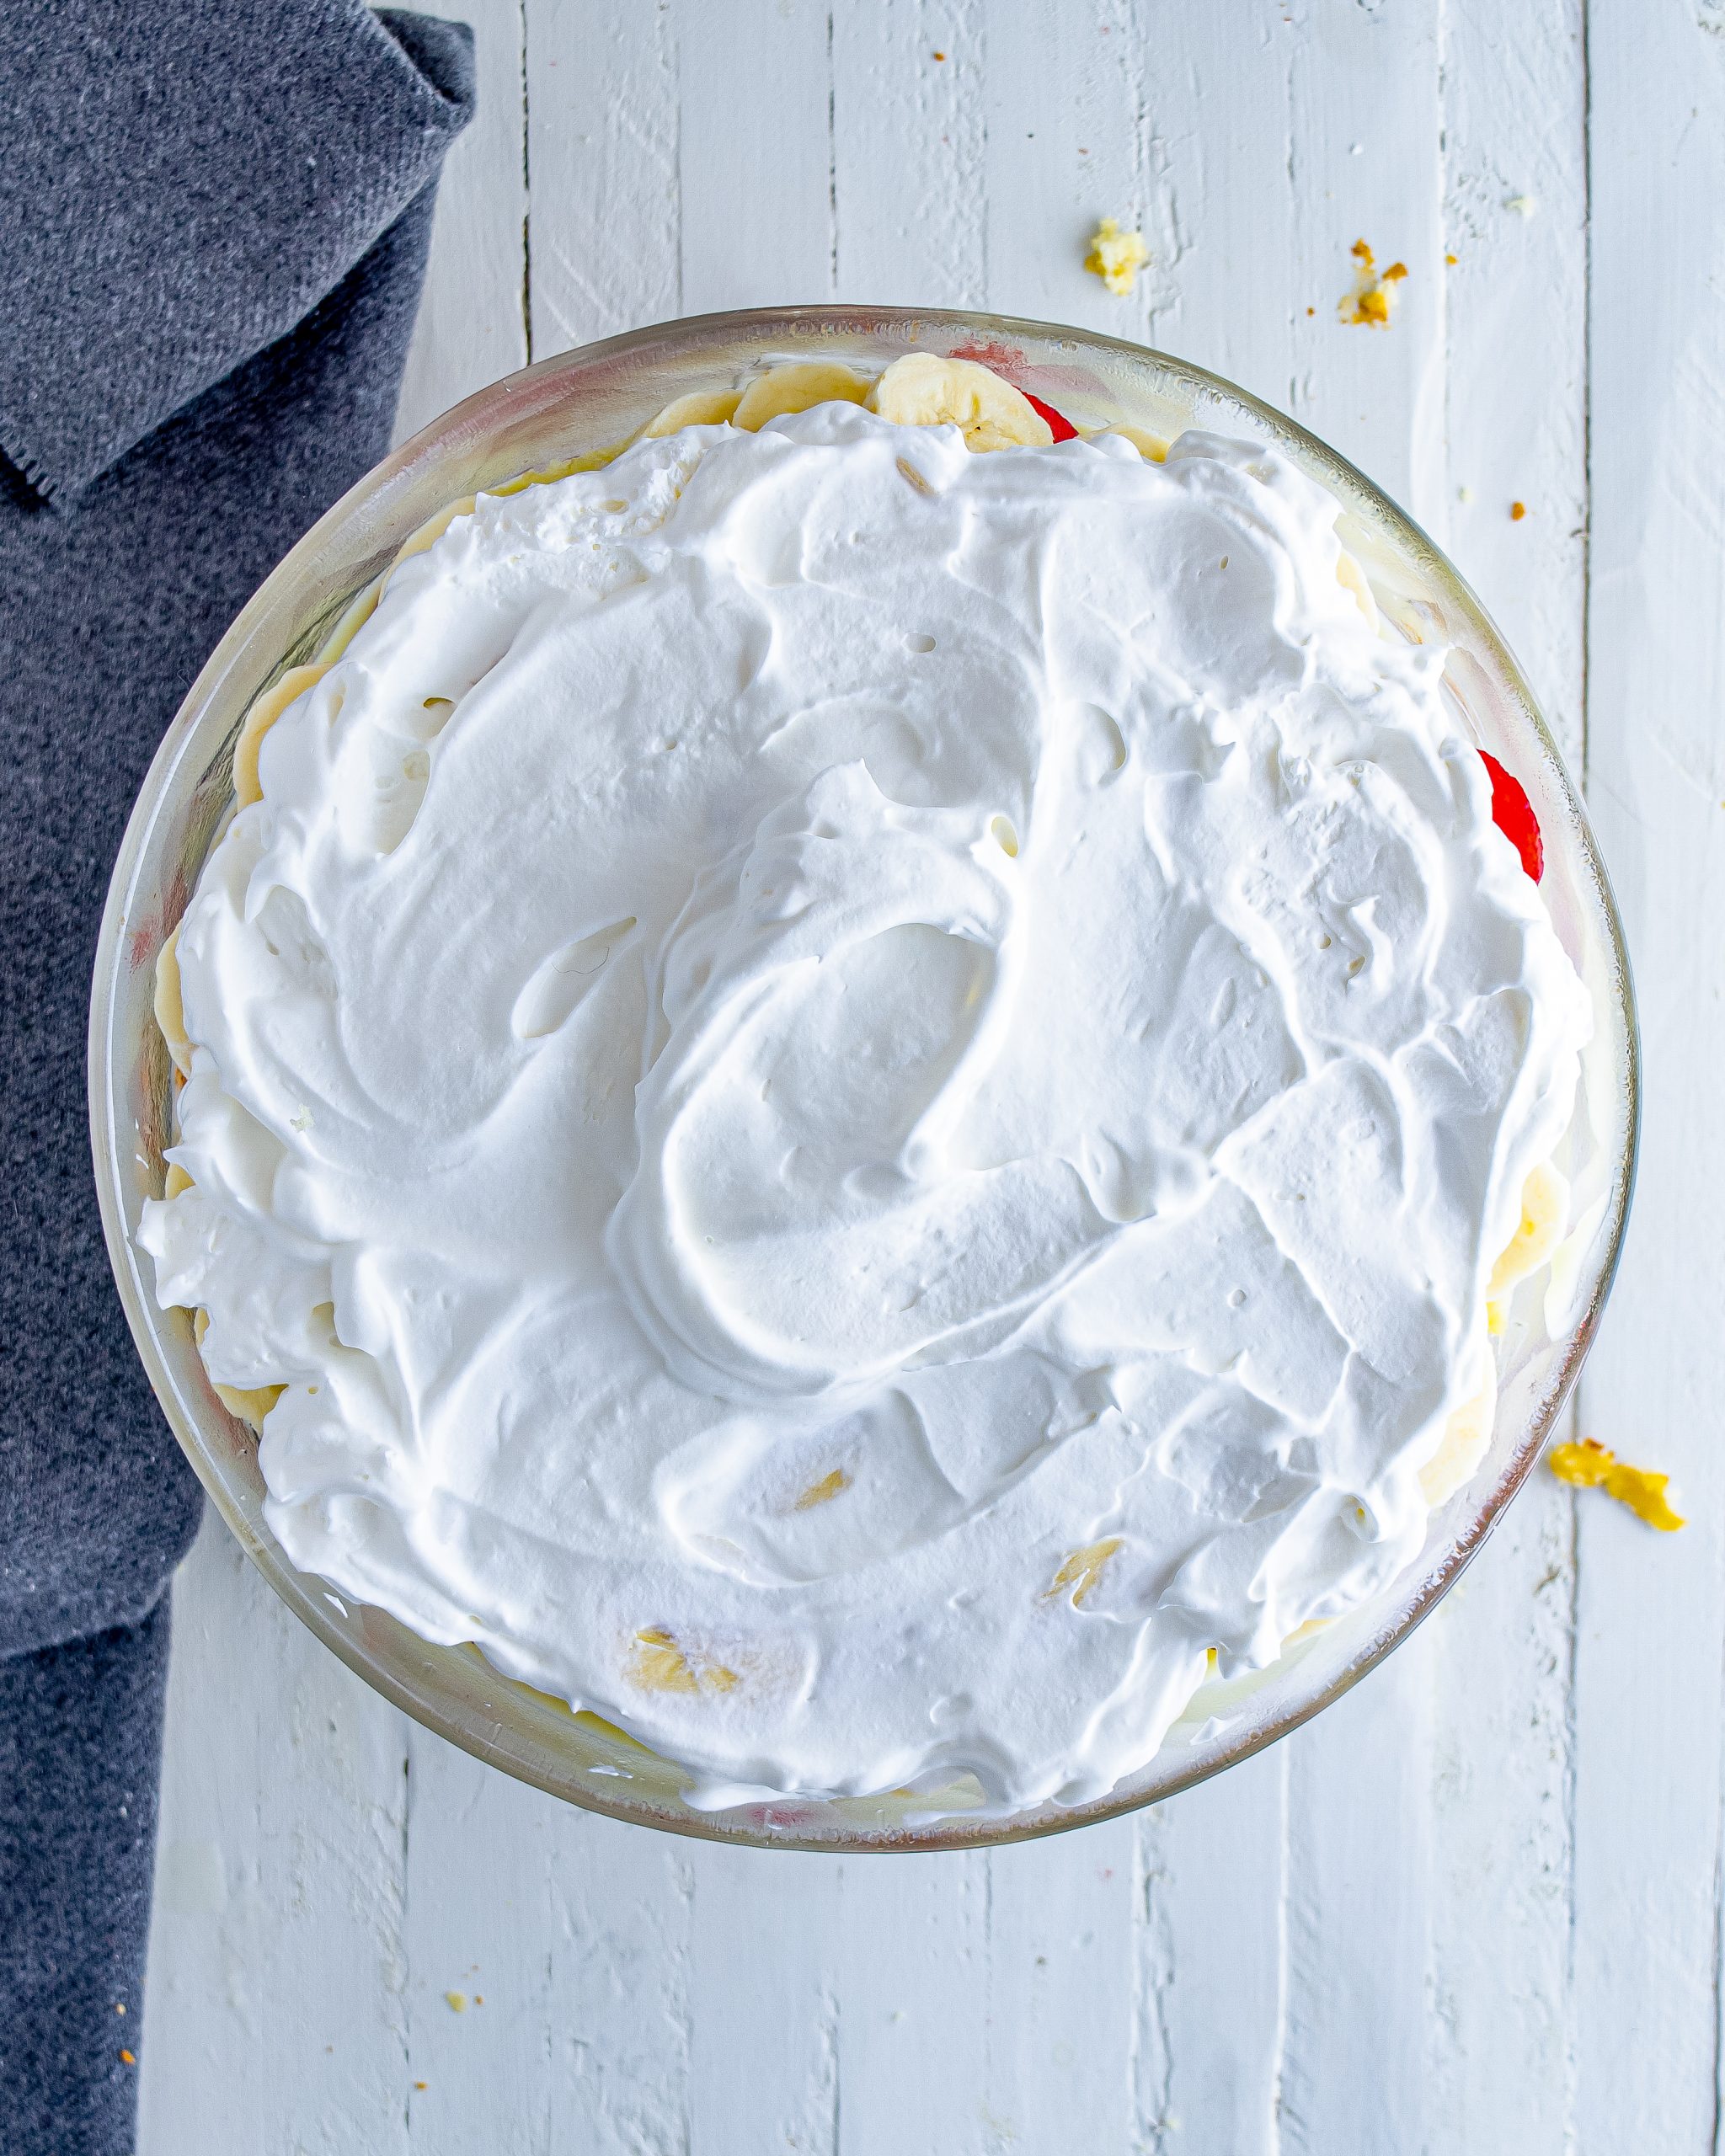 Spread the Cool Whip topping on top, and chill for several hours up to overnight before serving.